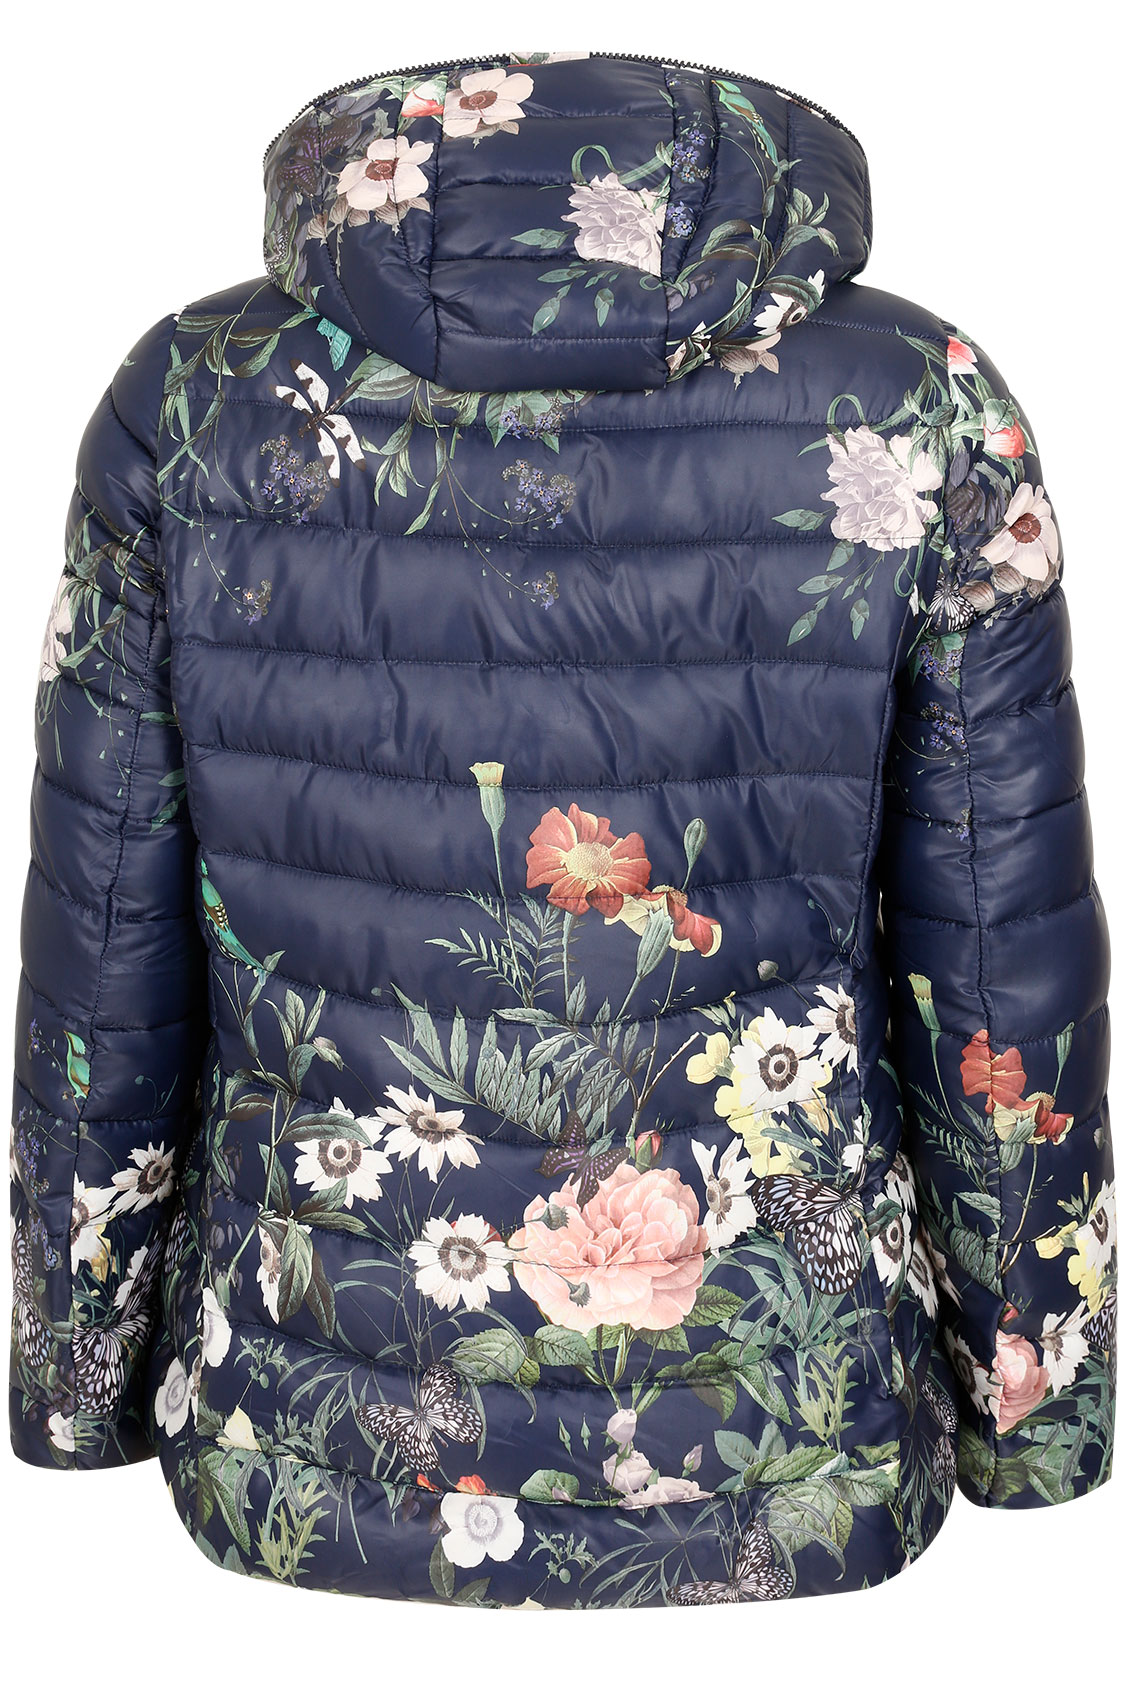 PAPRIKA Navy Floral Print Quilted Puffer Jacket With Hood plus size 18 ...